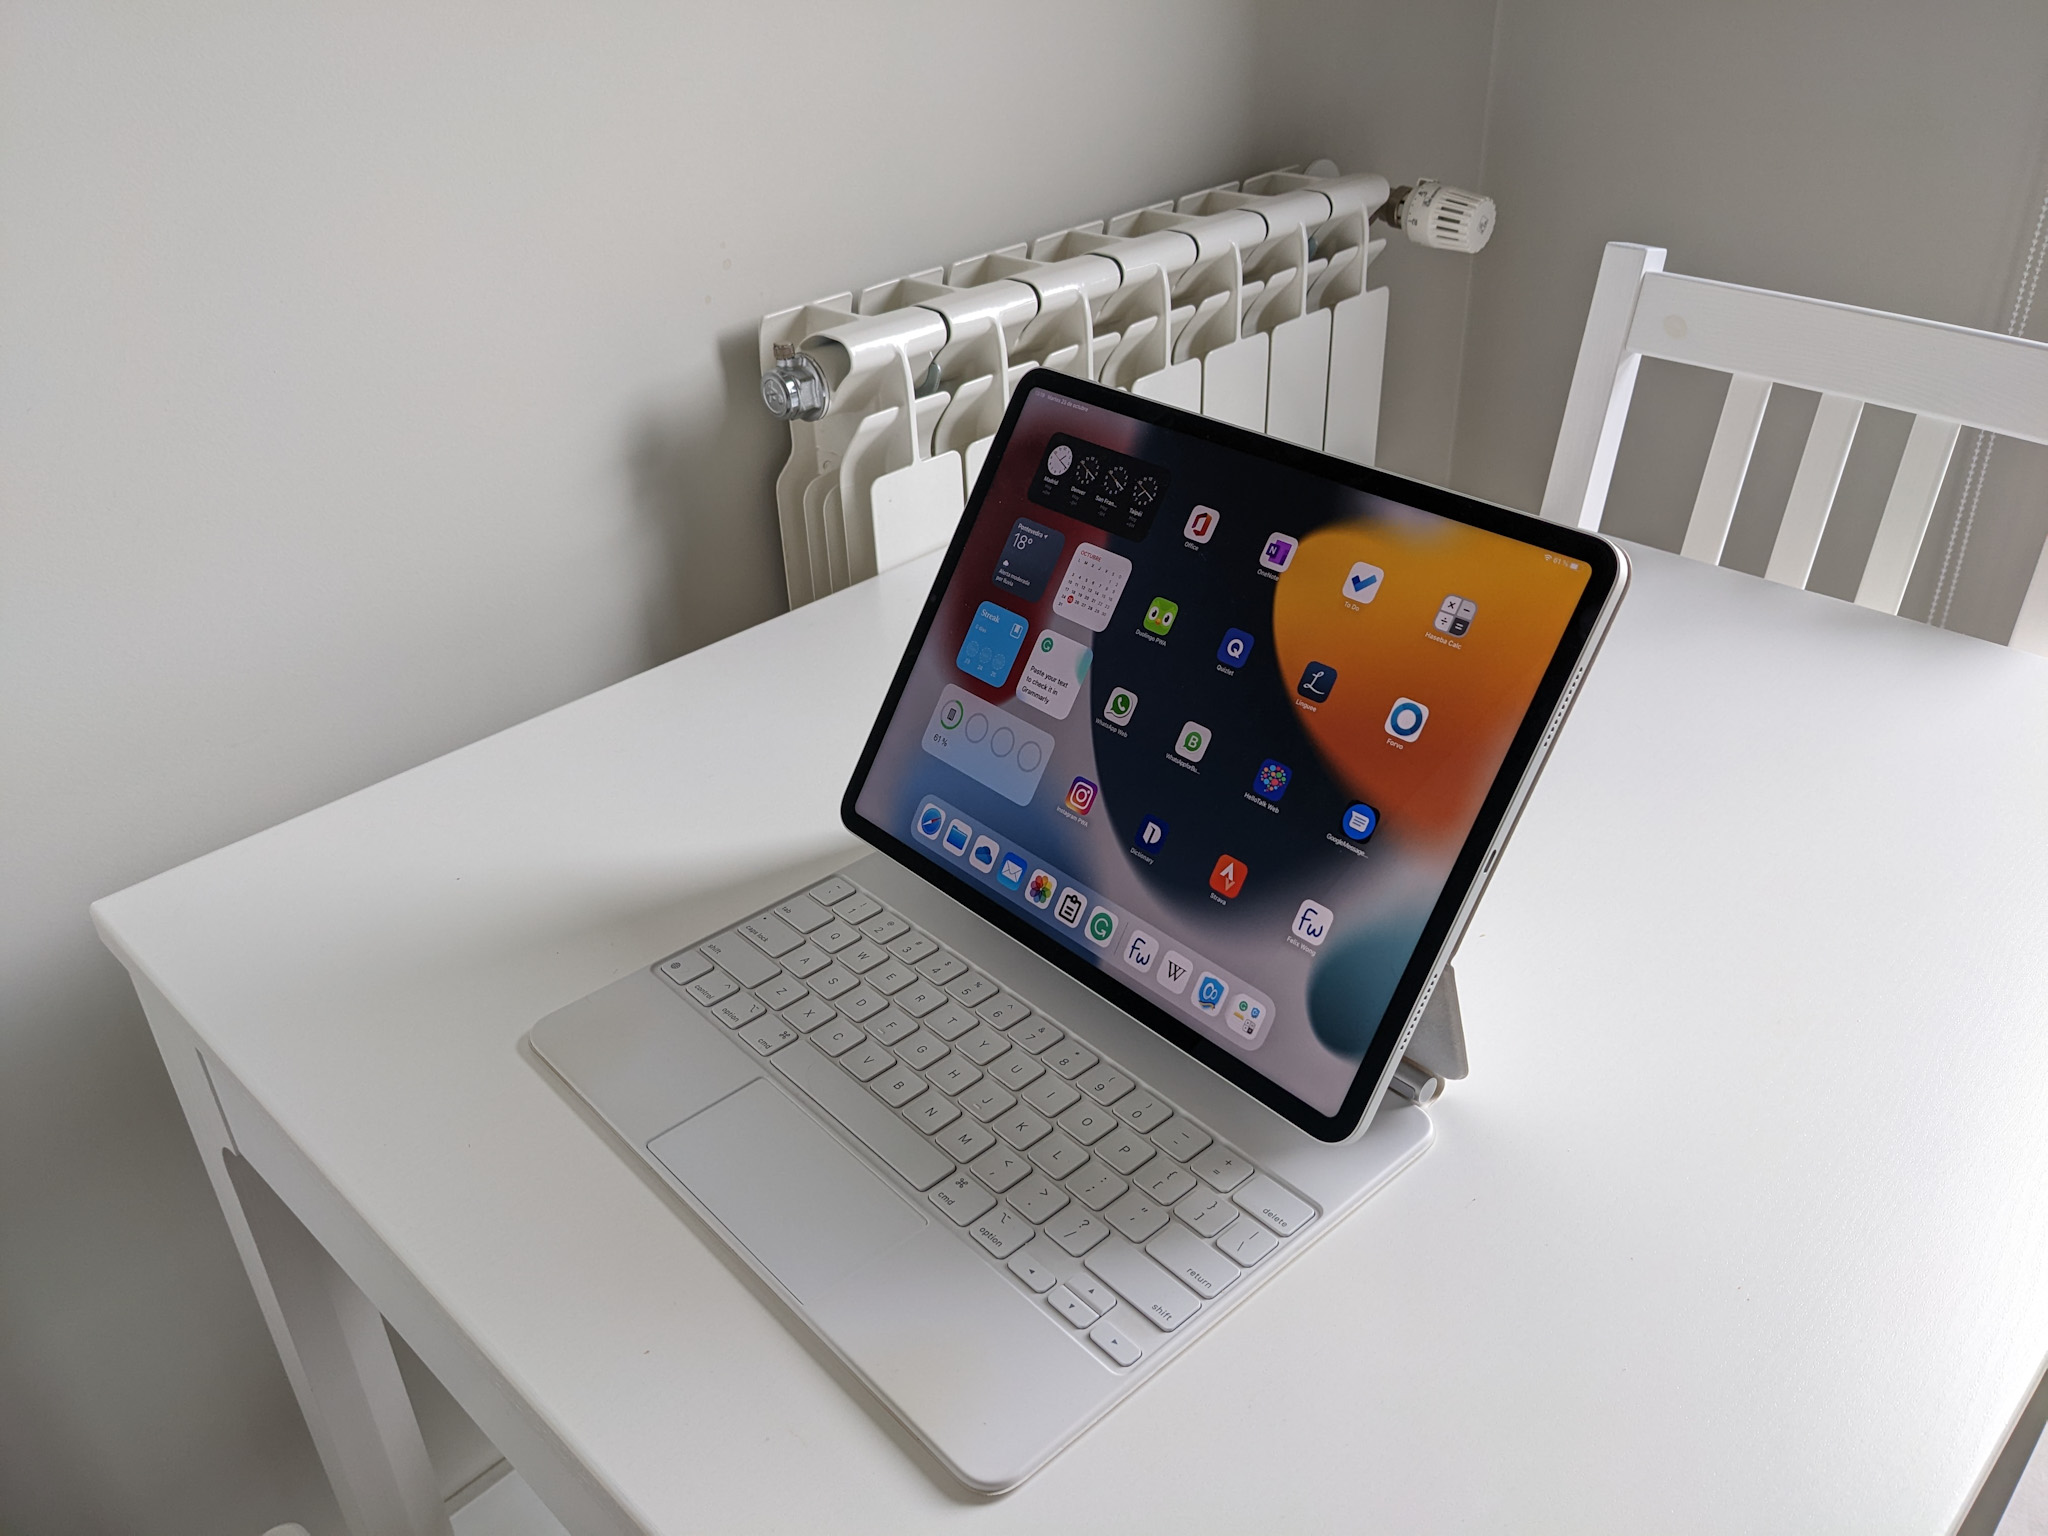 A white iPad Pro 12.9 and Apple Magic Keyboard on a white table.